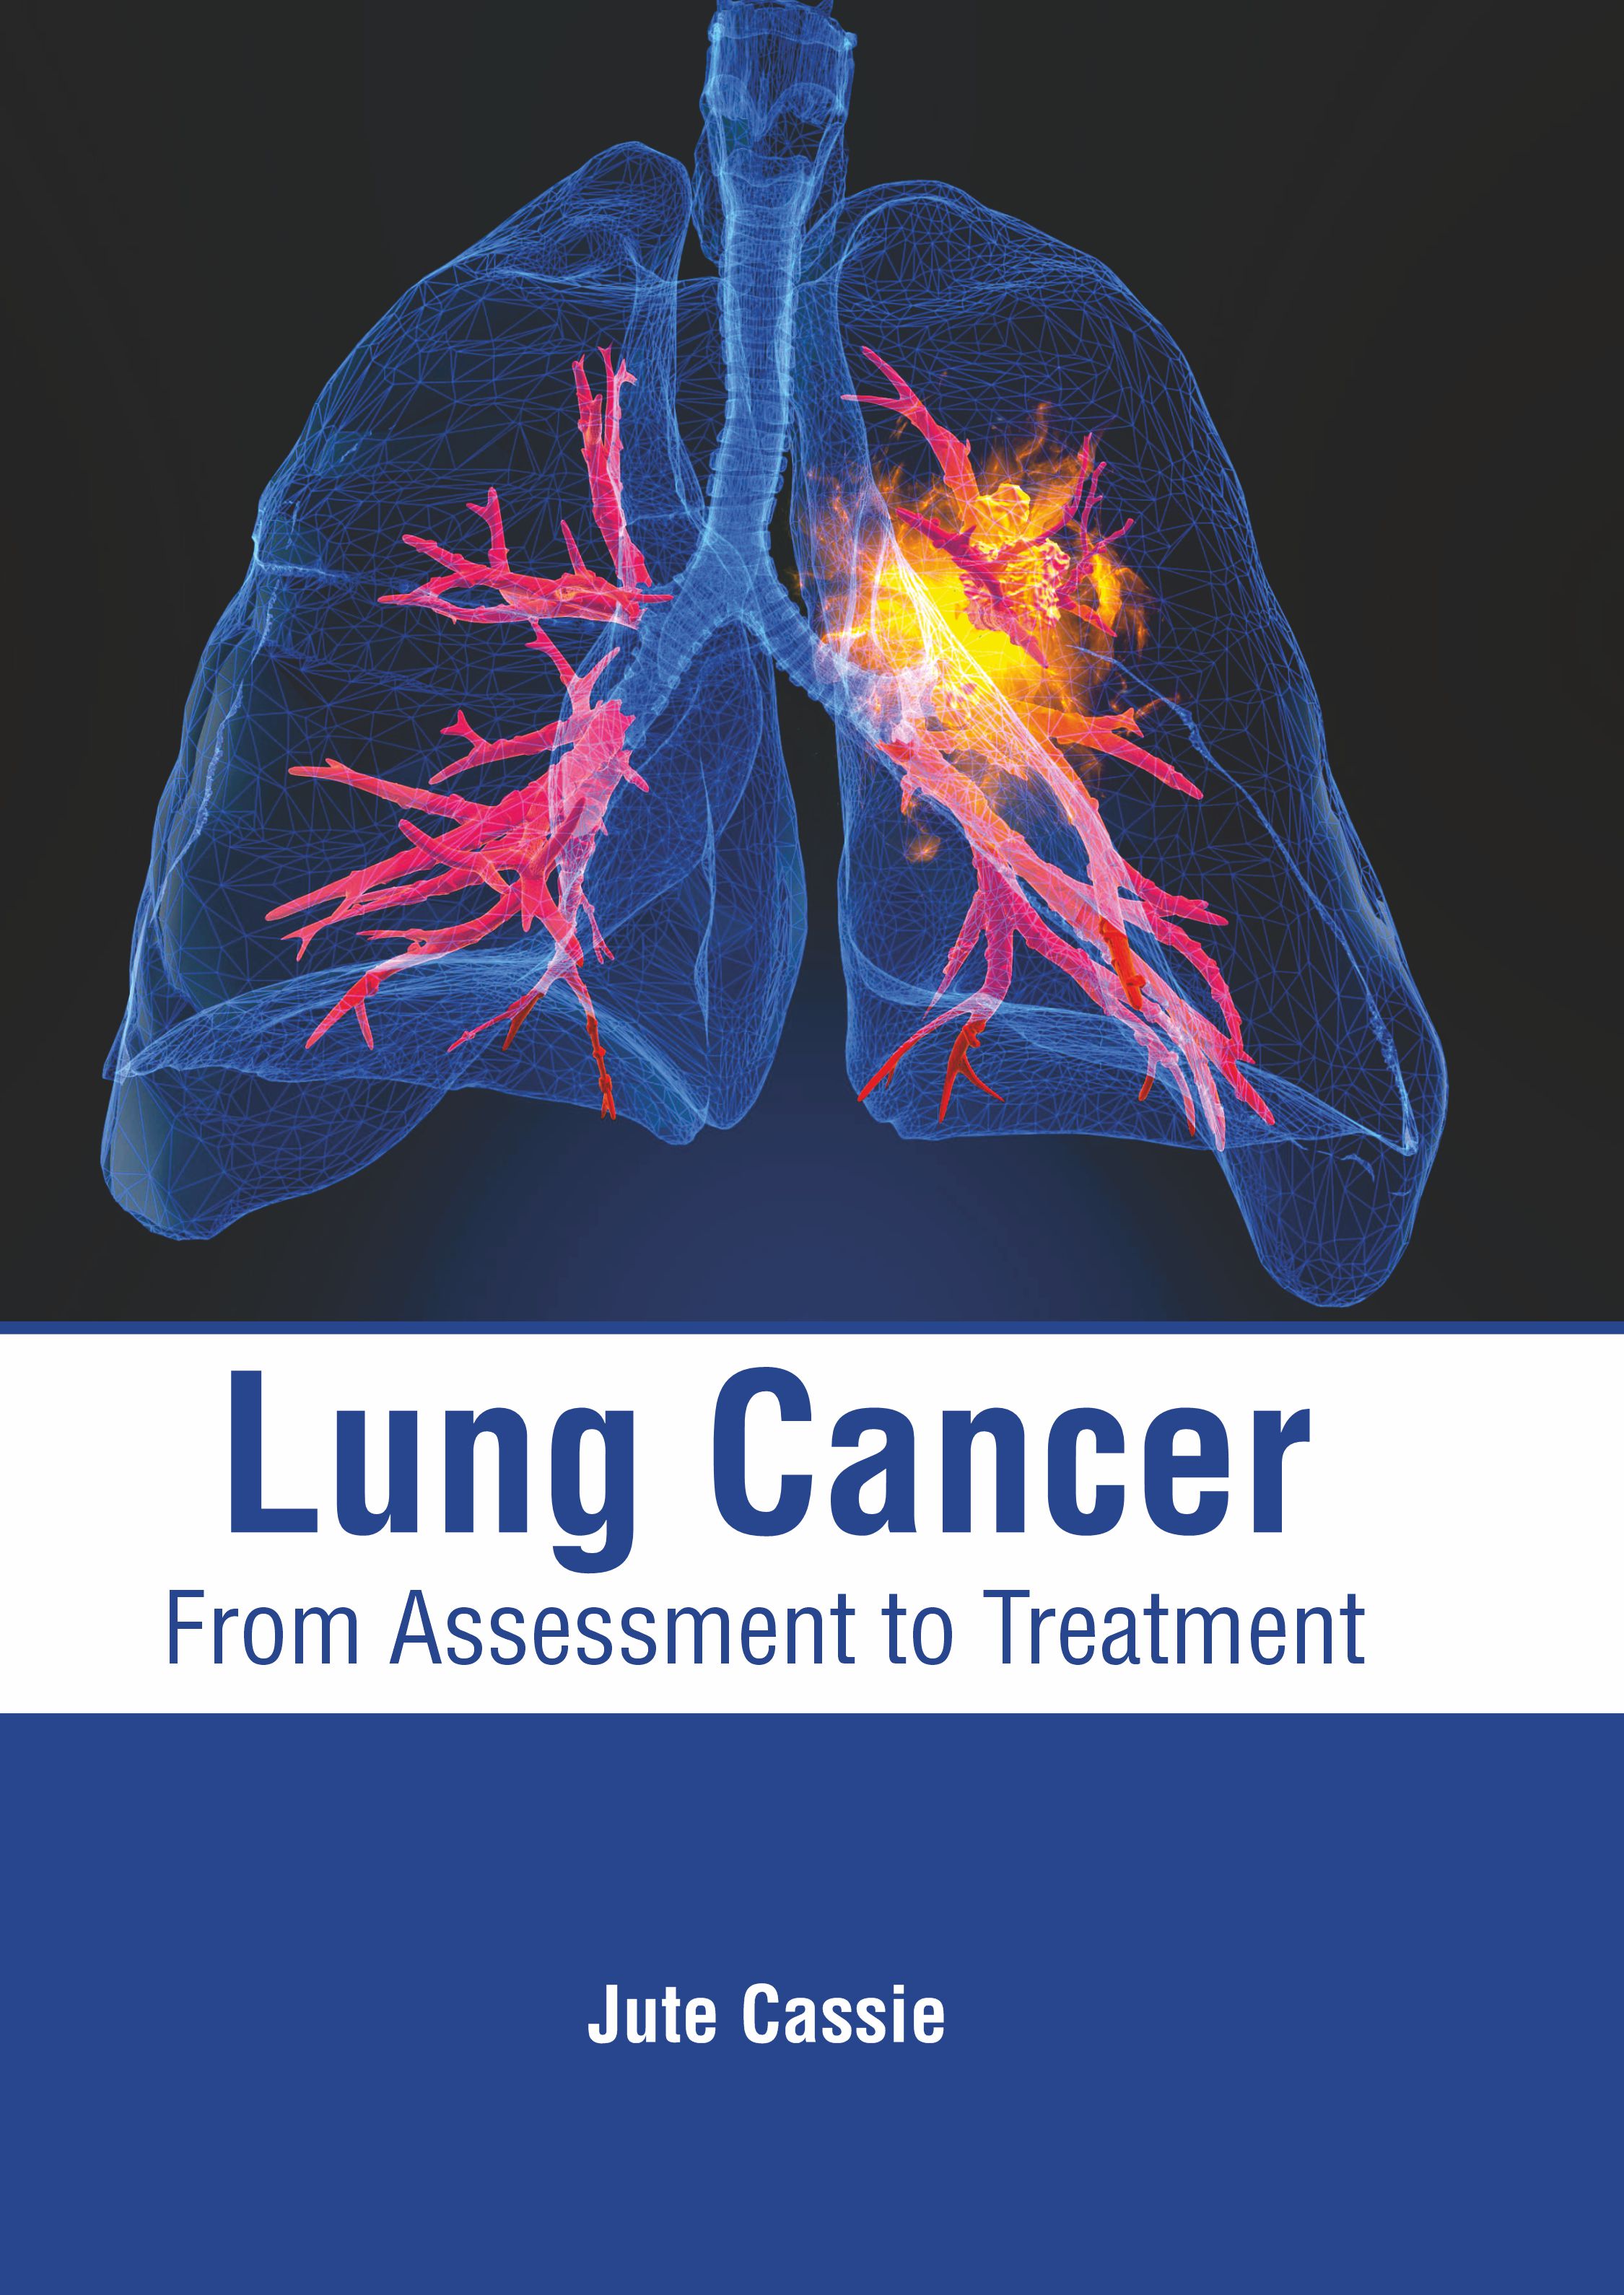 LUNG CANCER: FROM ASSESSMENT TO TREATMENT